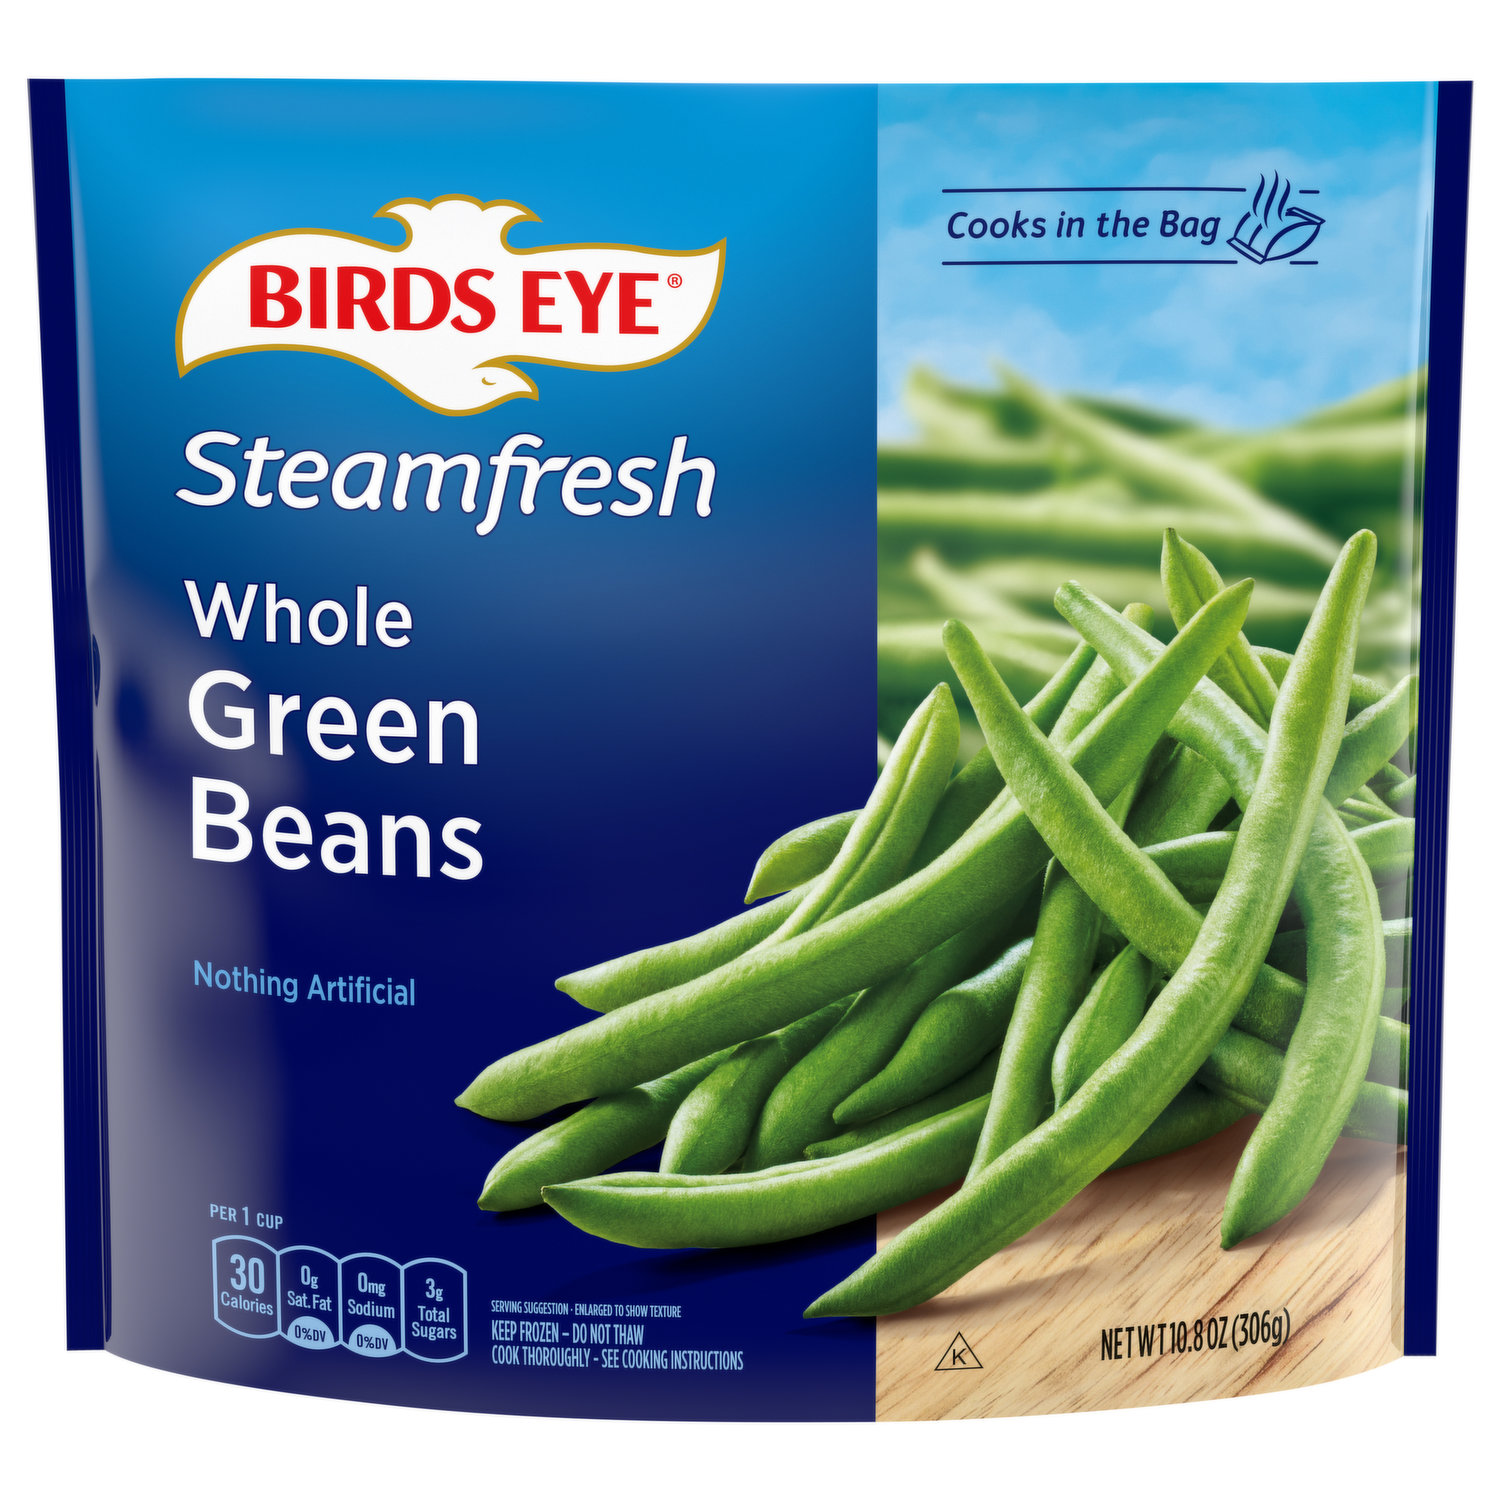 French Cut Green Beans - Simple Harvest - Vegetables - Pictsweet Farms